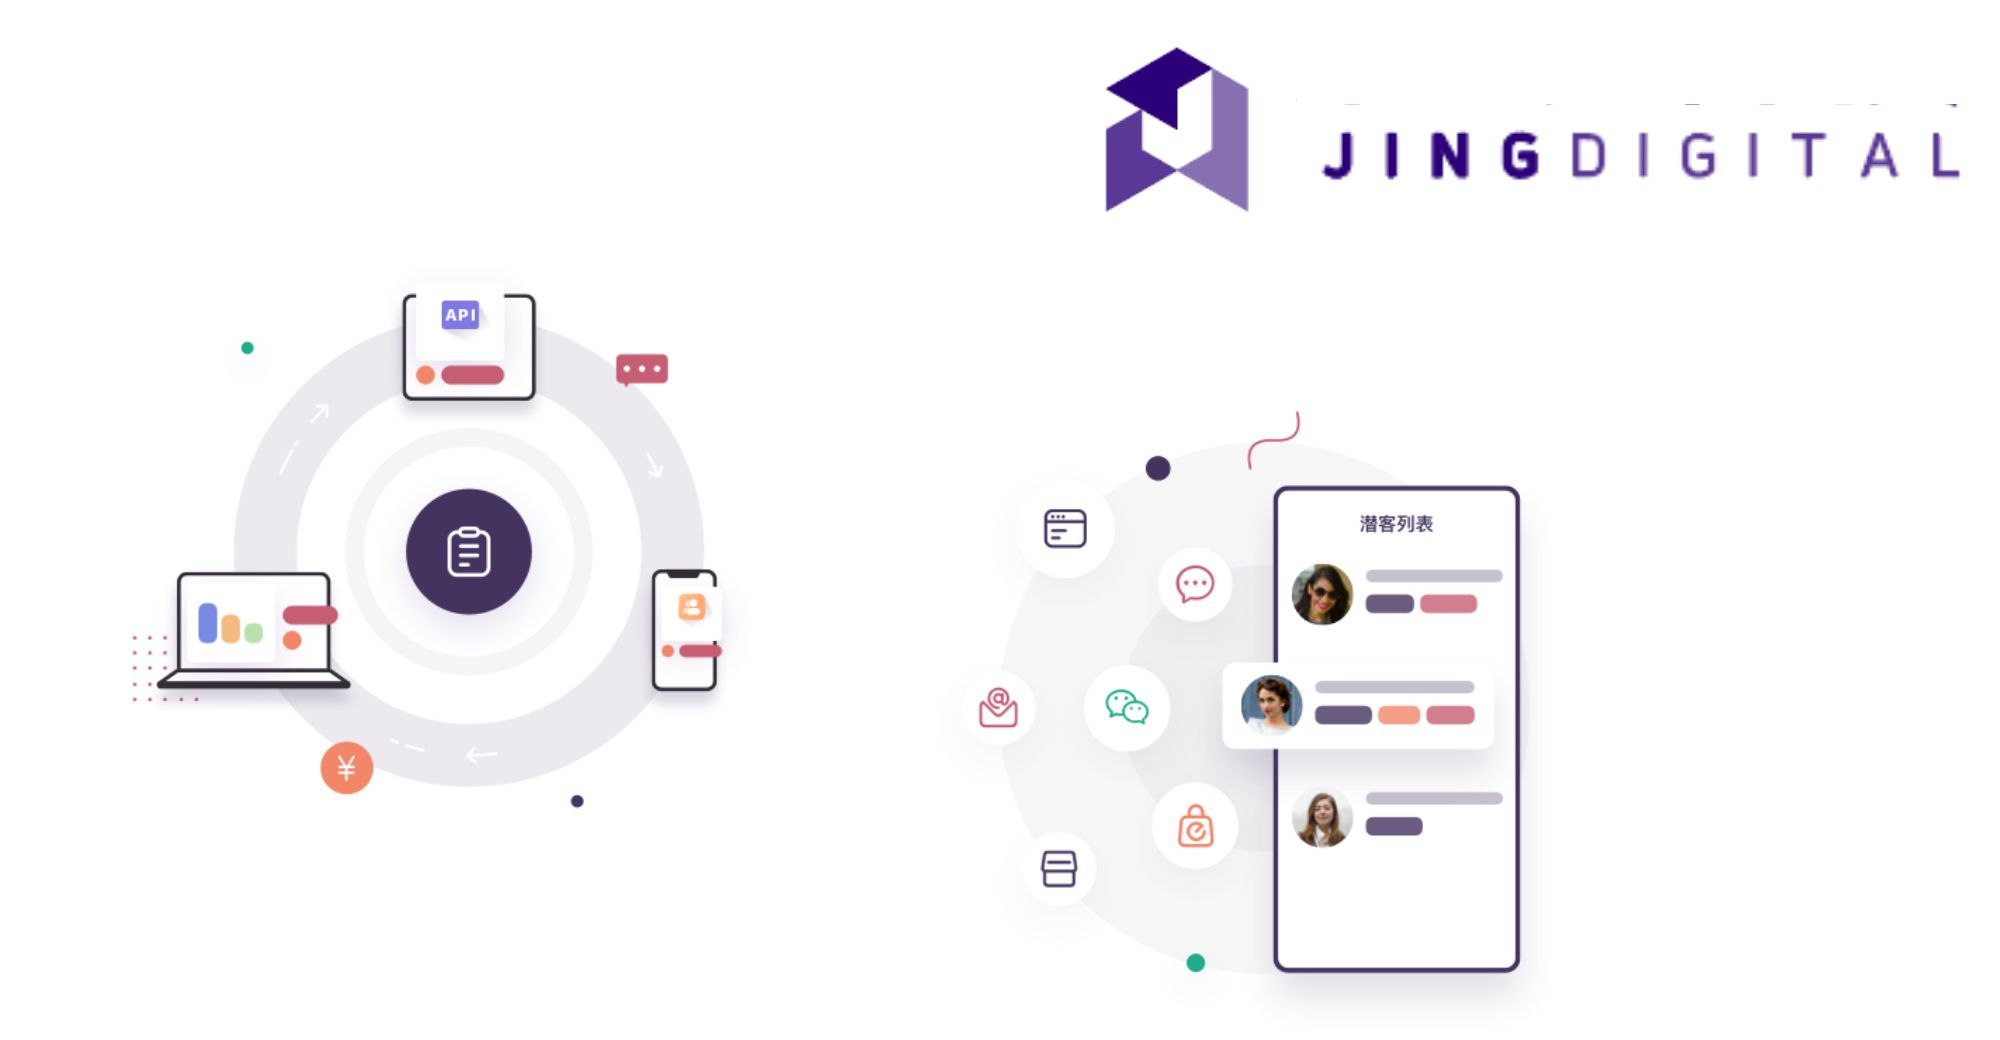 Marketing Technology Company JINGdigital Secures A+ Round of Financing